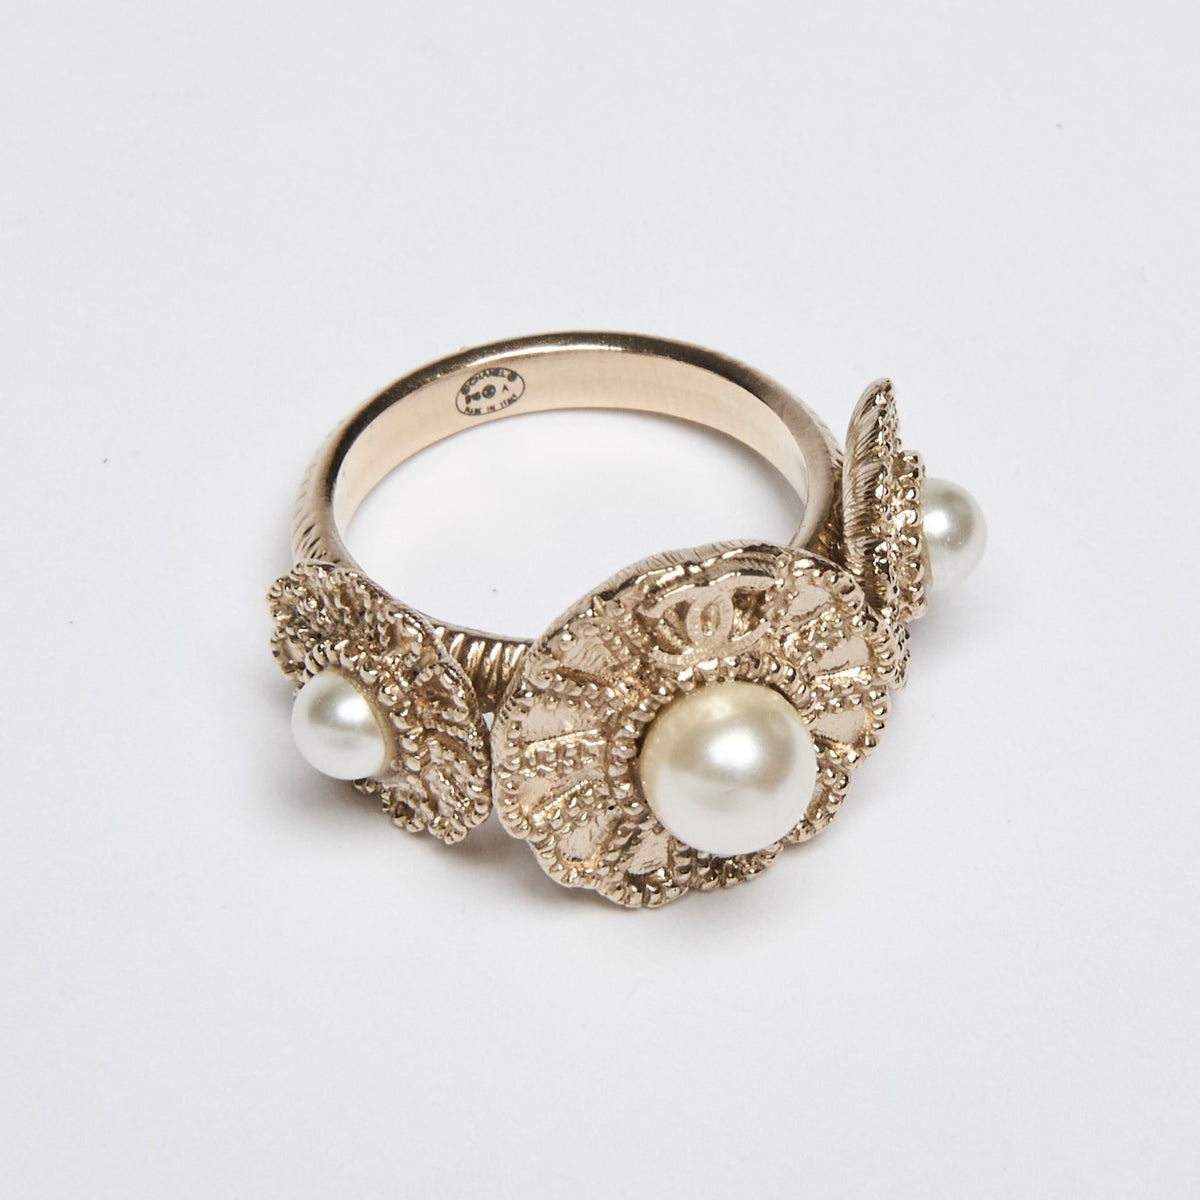 Excellent Pre-Loved Gold Tone Metal Ring with Floral Motif and Pearls Embellishment.(stamp)